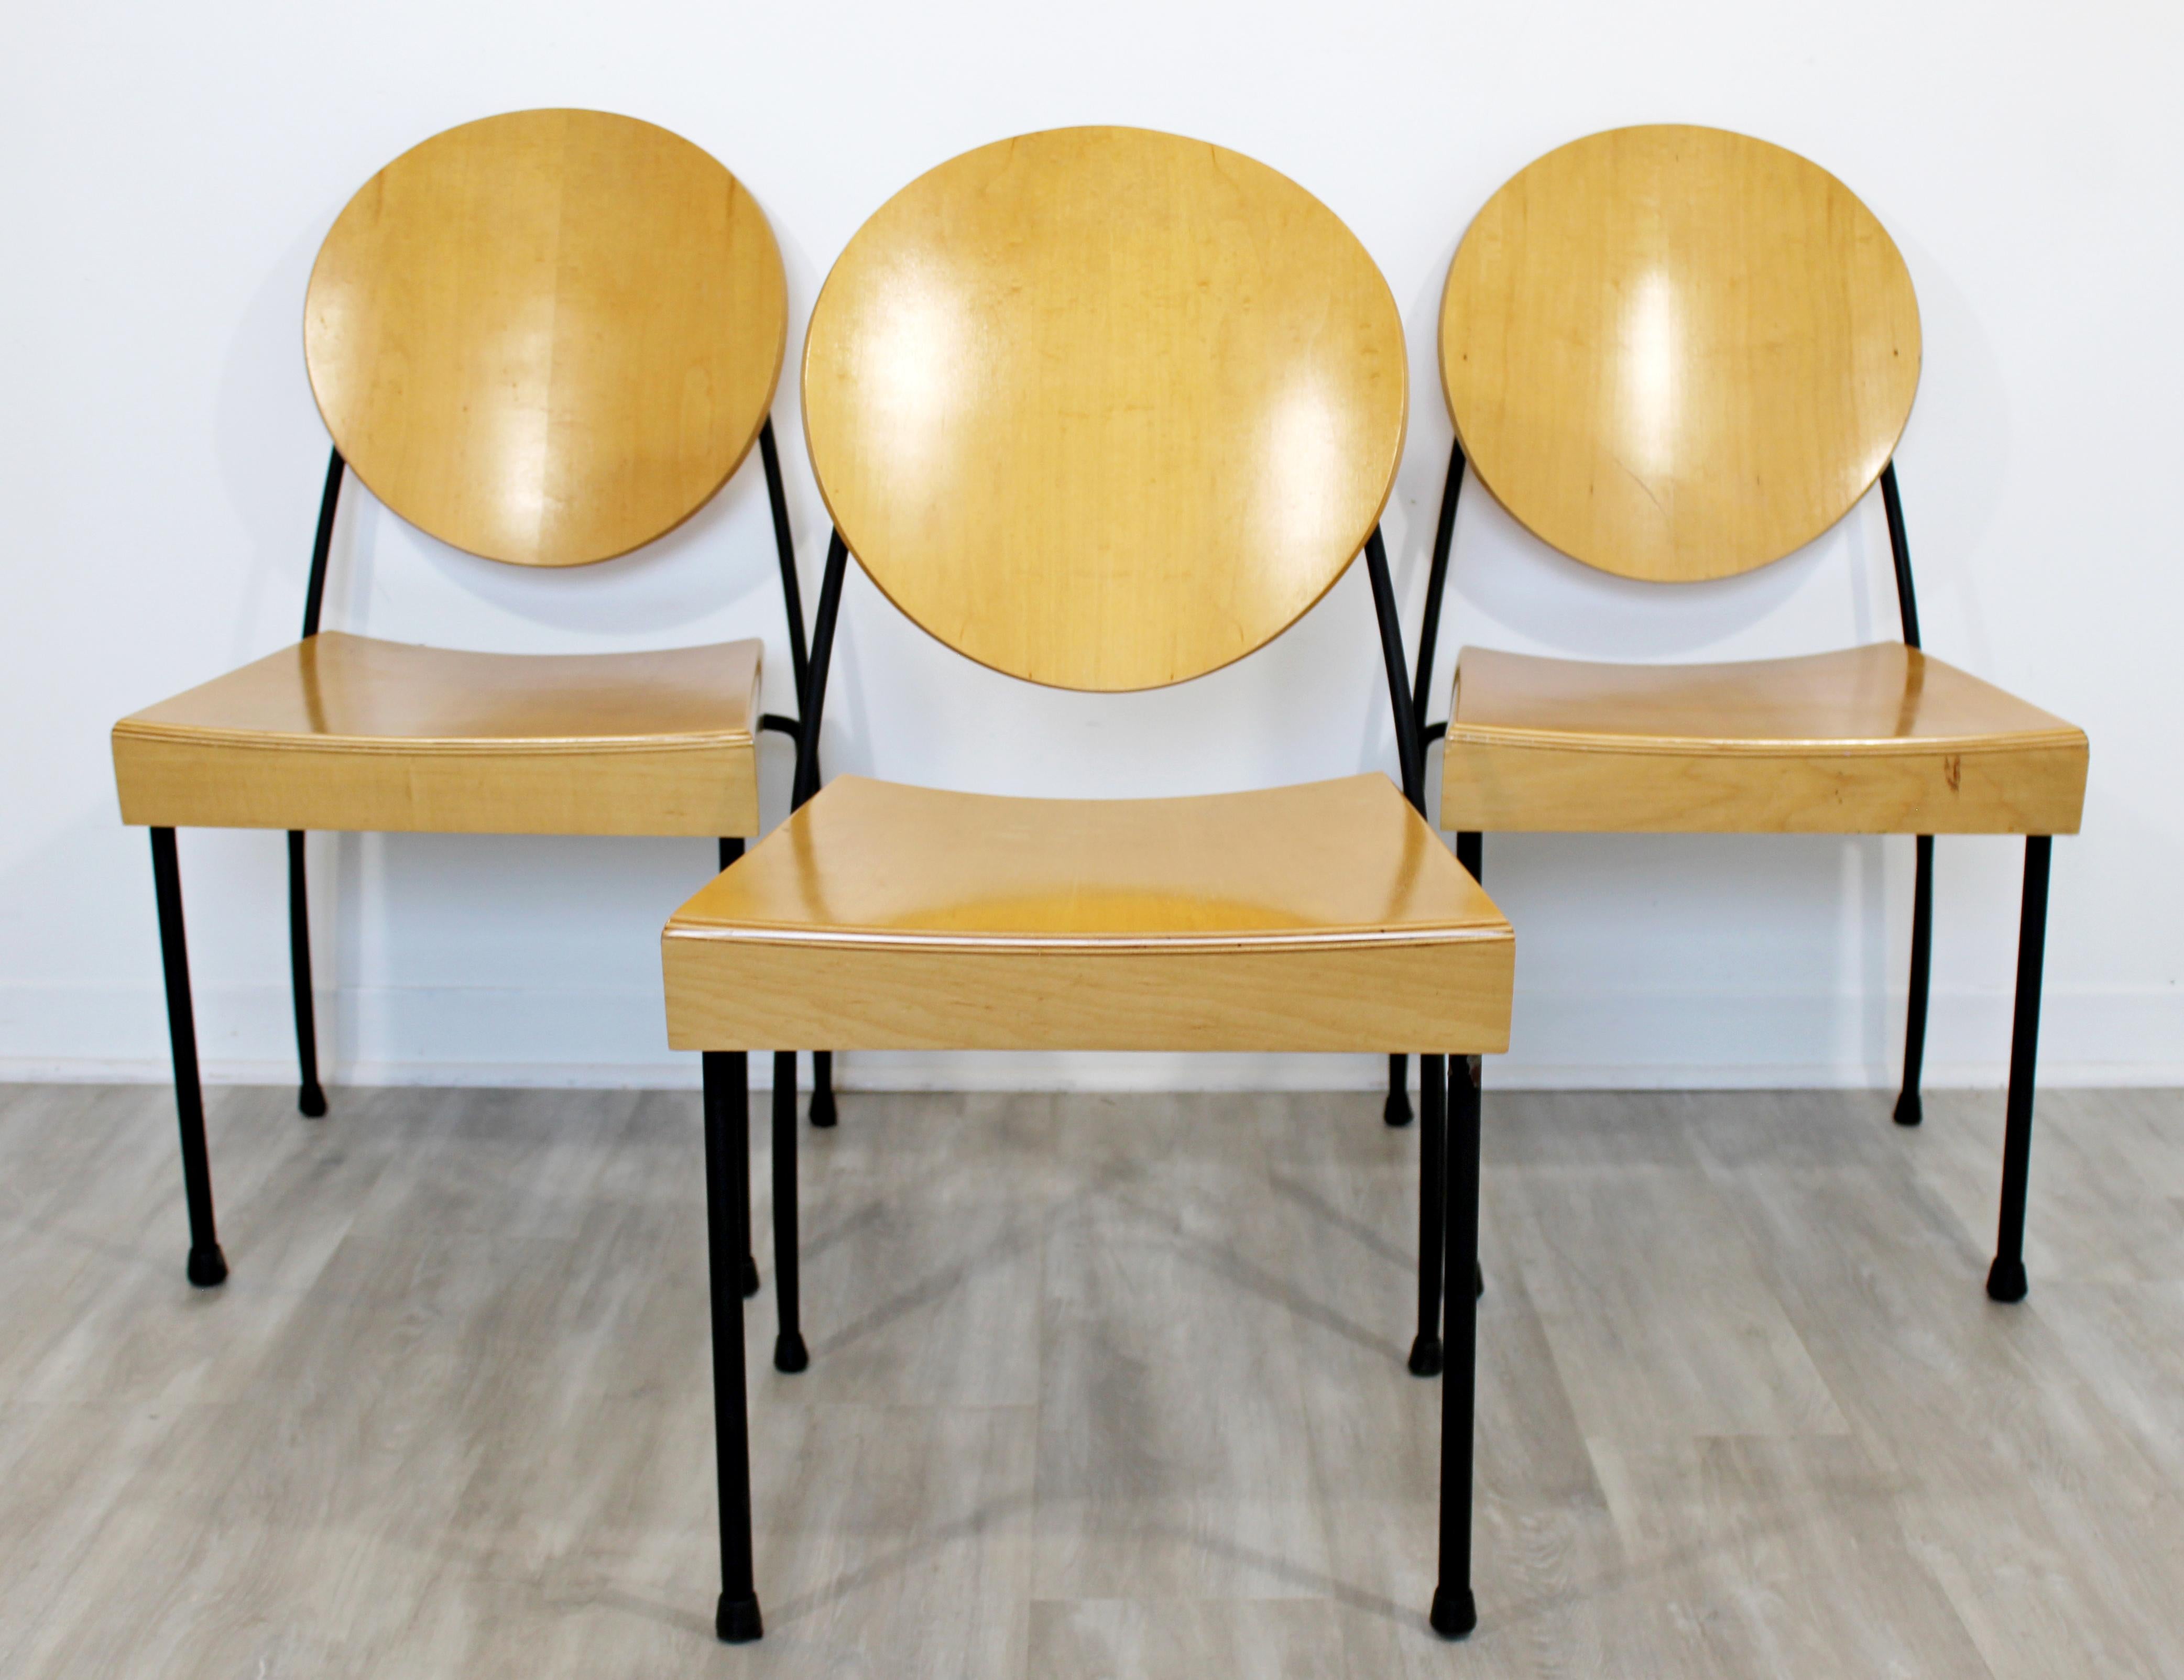 For your consideration is a beautiful set of three wood and metal Memphis chairs by designer Dakota Jackson. In excellent condition. The dimensions are 18.5